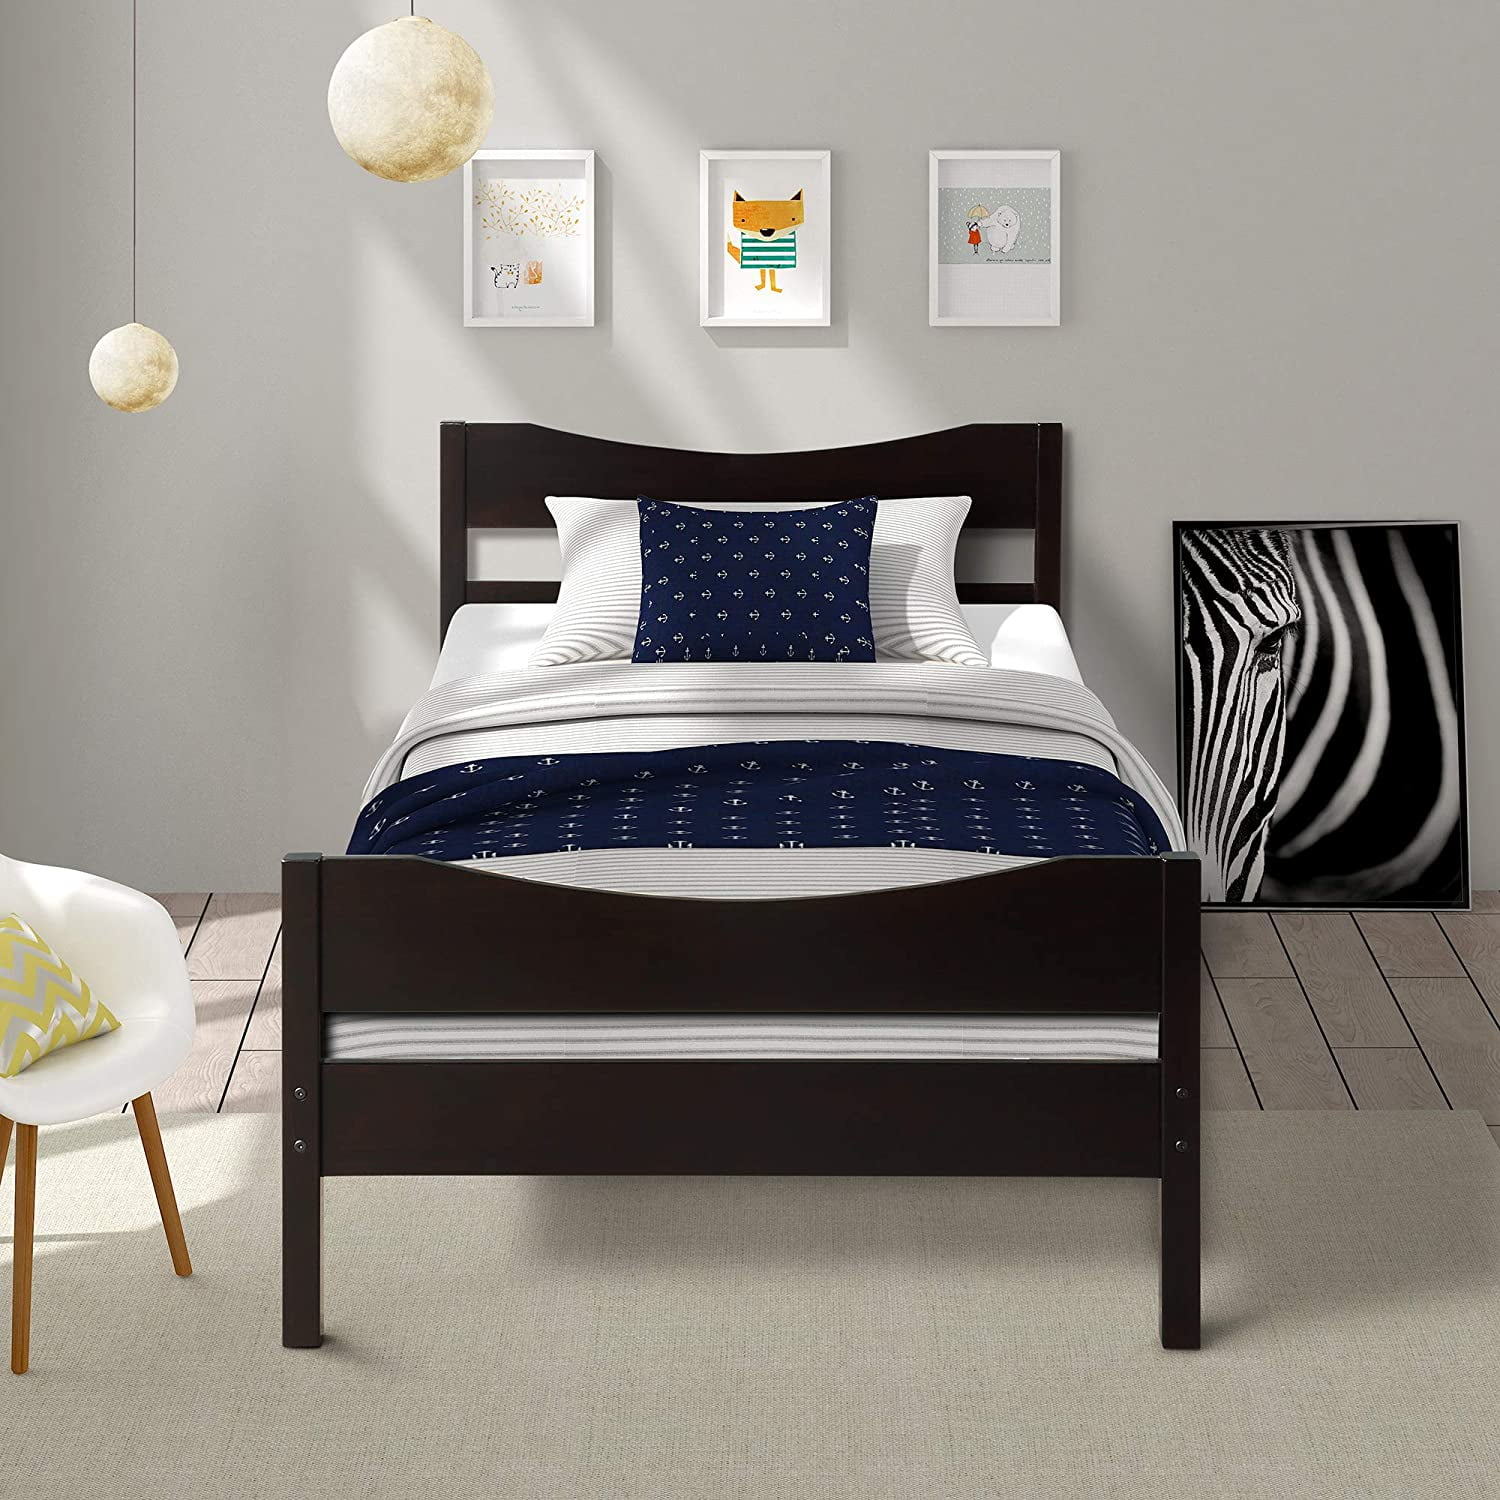 Platform Bed Frame with Headboard and Footboard, Twin Bed Frames for Kids, Heavy Duty Pine Wood Twin Bed Frame, Modern Twin Size Bedroom Furniture with Wood Slats Support, No Box Spring Needed, Q12899